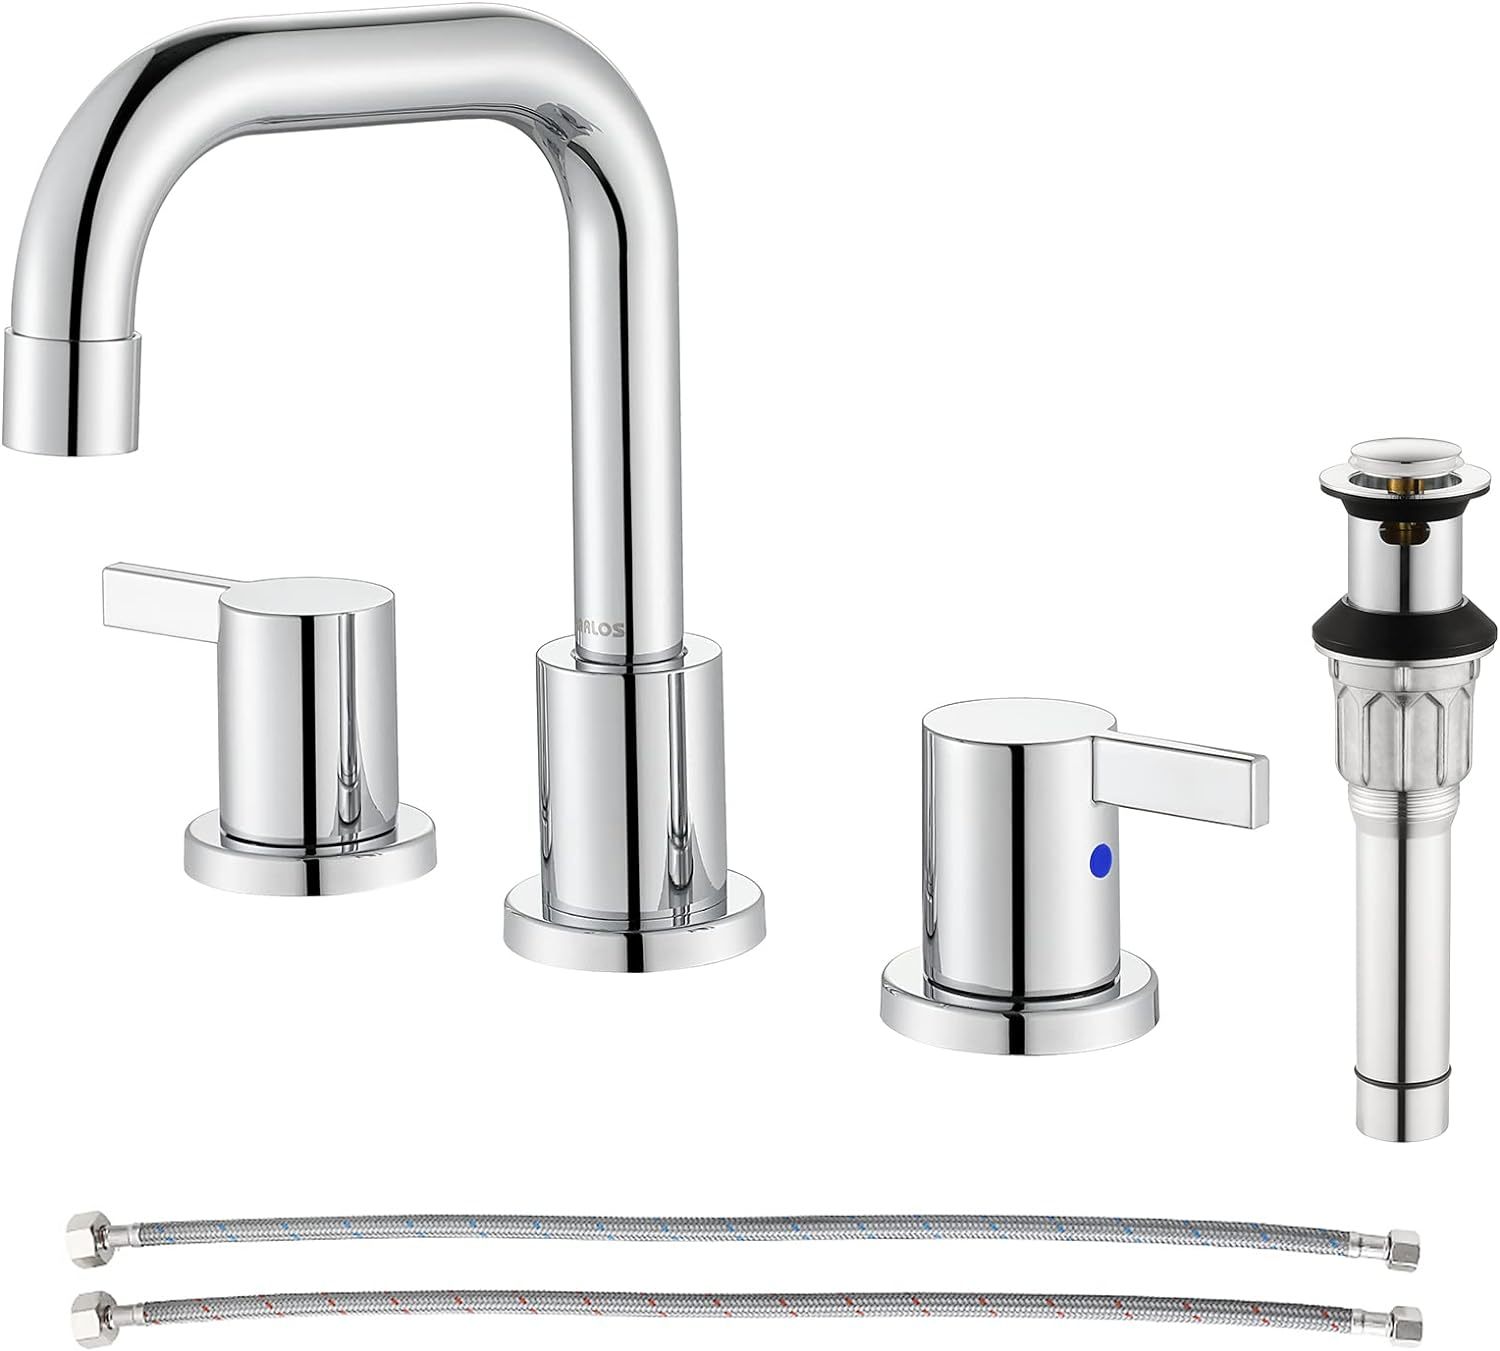 Primary image for Parlos Two-Handle Widespread Bathroom Faucet With Metal Pop-Up Drain, 1364901.